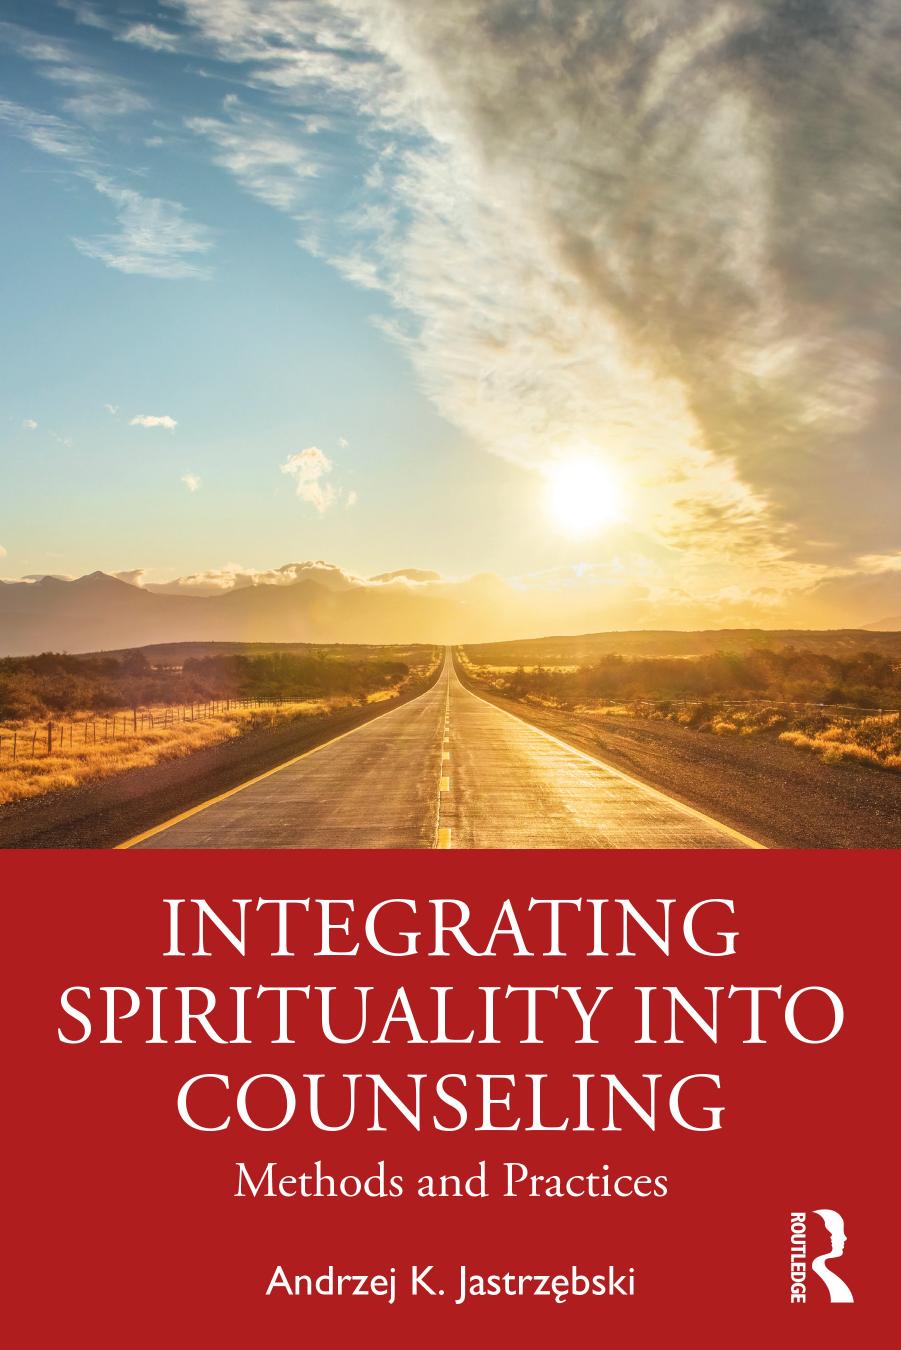 Integrating Spirituality into Counseling: Methods and Practices by Andrzej K. Jastrzębski